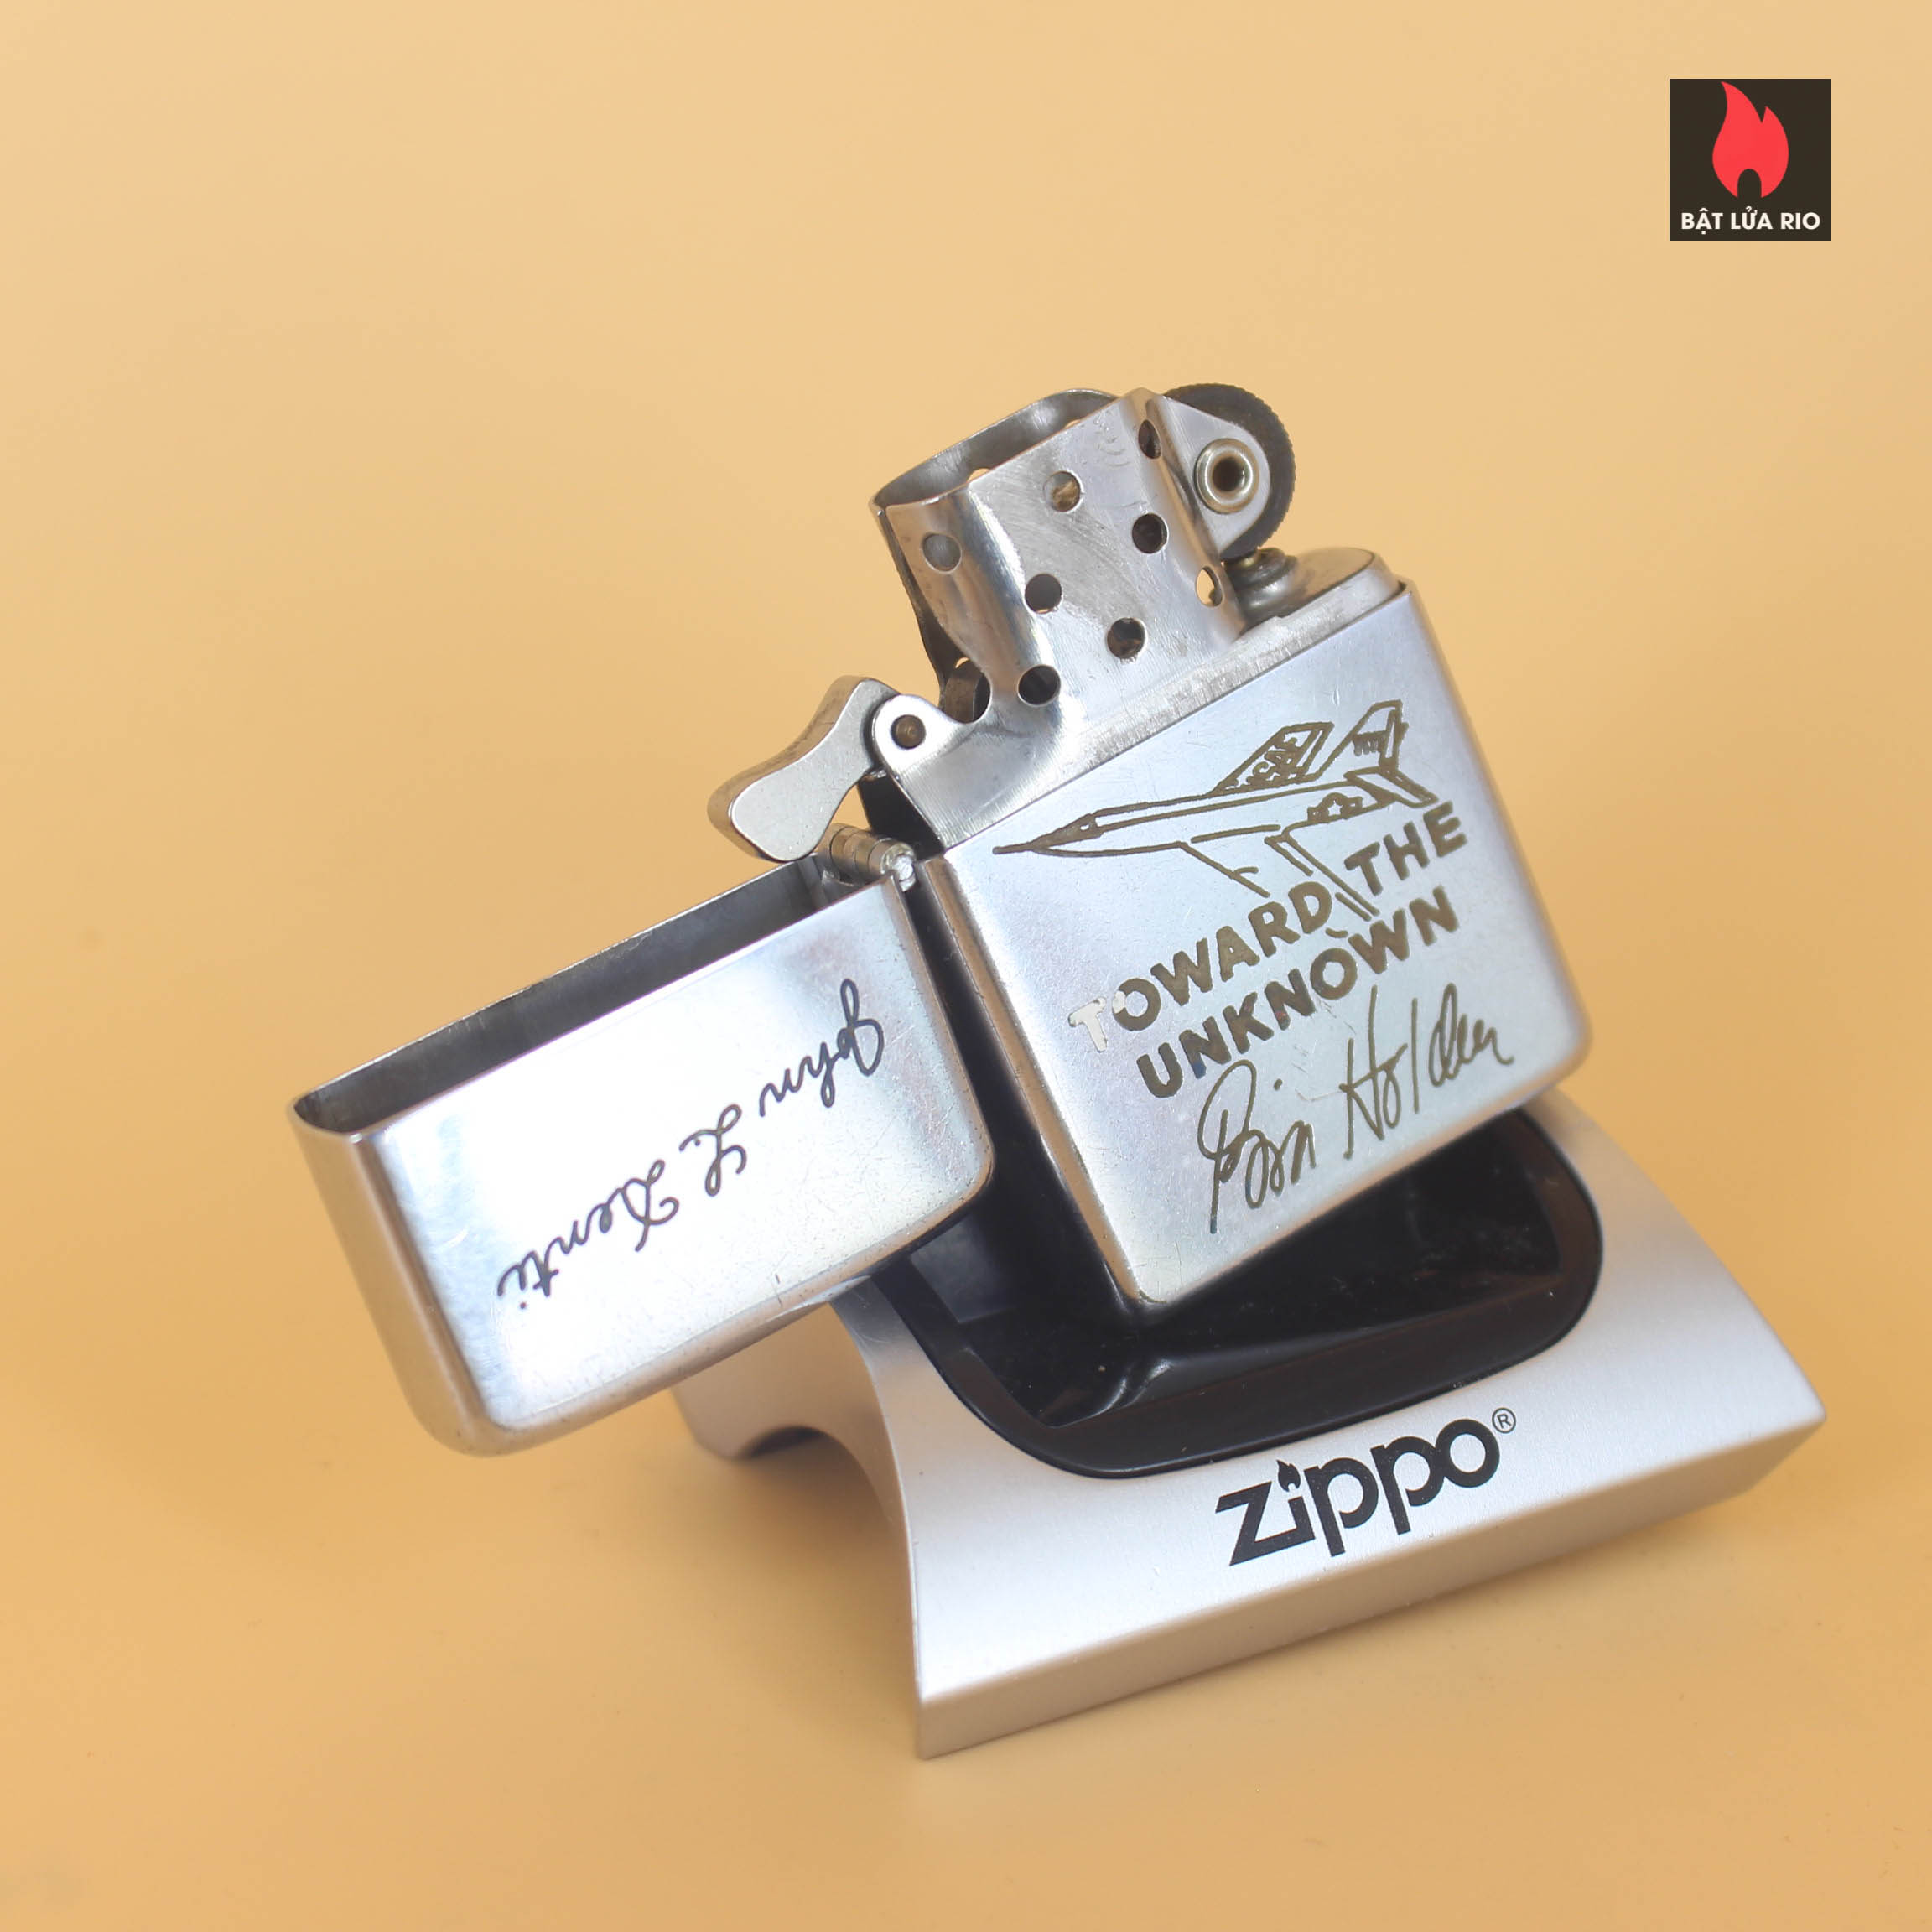 Zippo Xưa 1956 – Zippo lighter given to John L.Denti by Bill Holden - Star Of The Movie Toward the Unknown 9